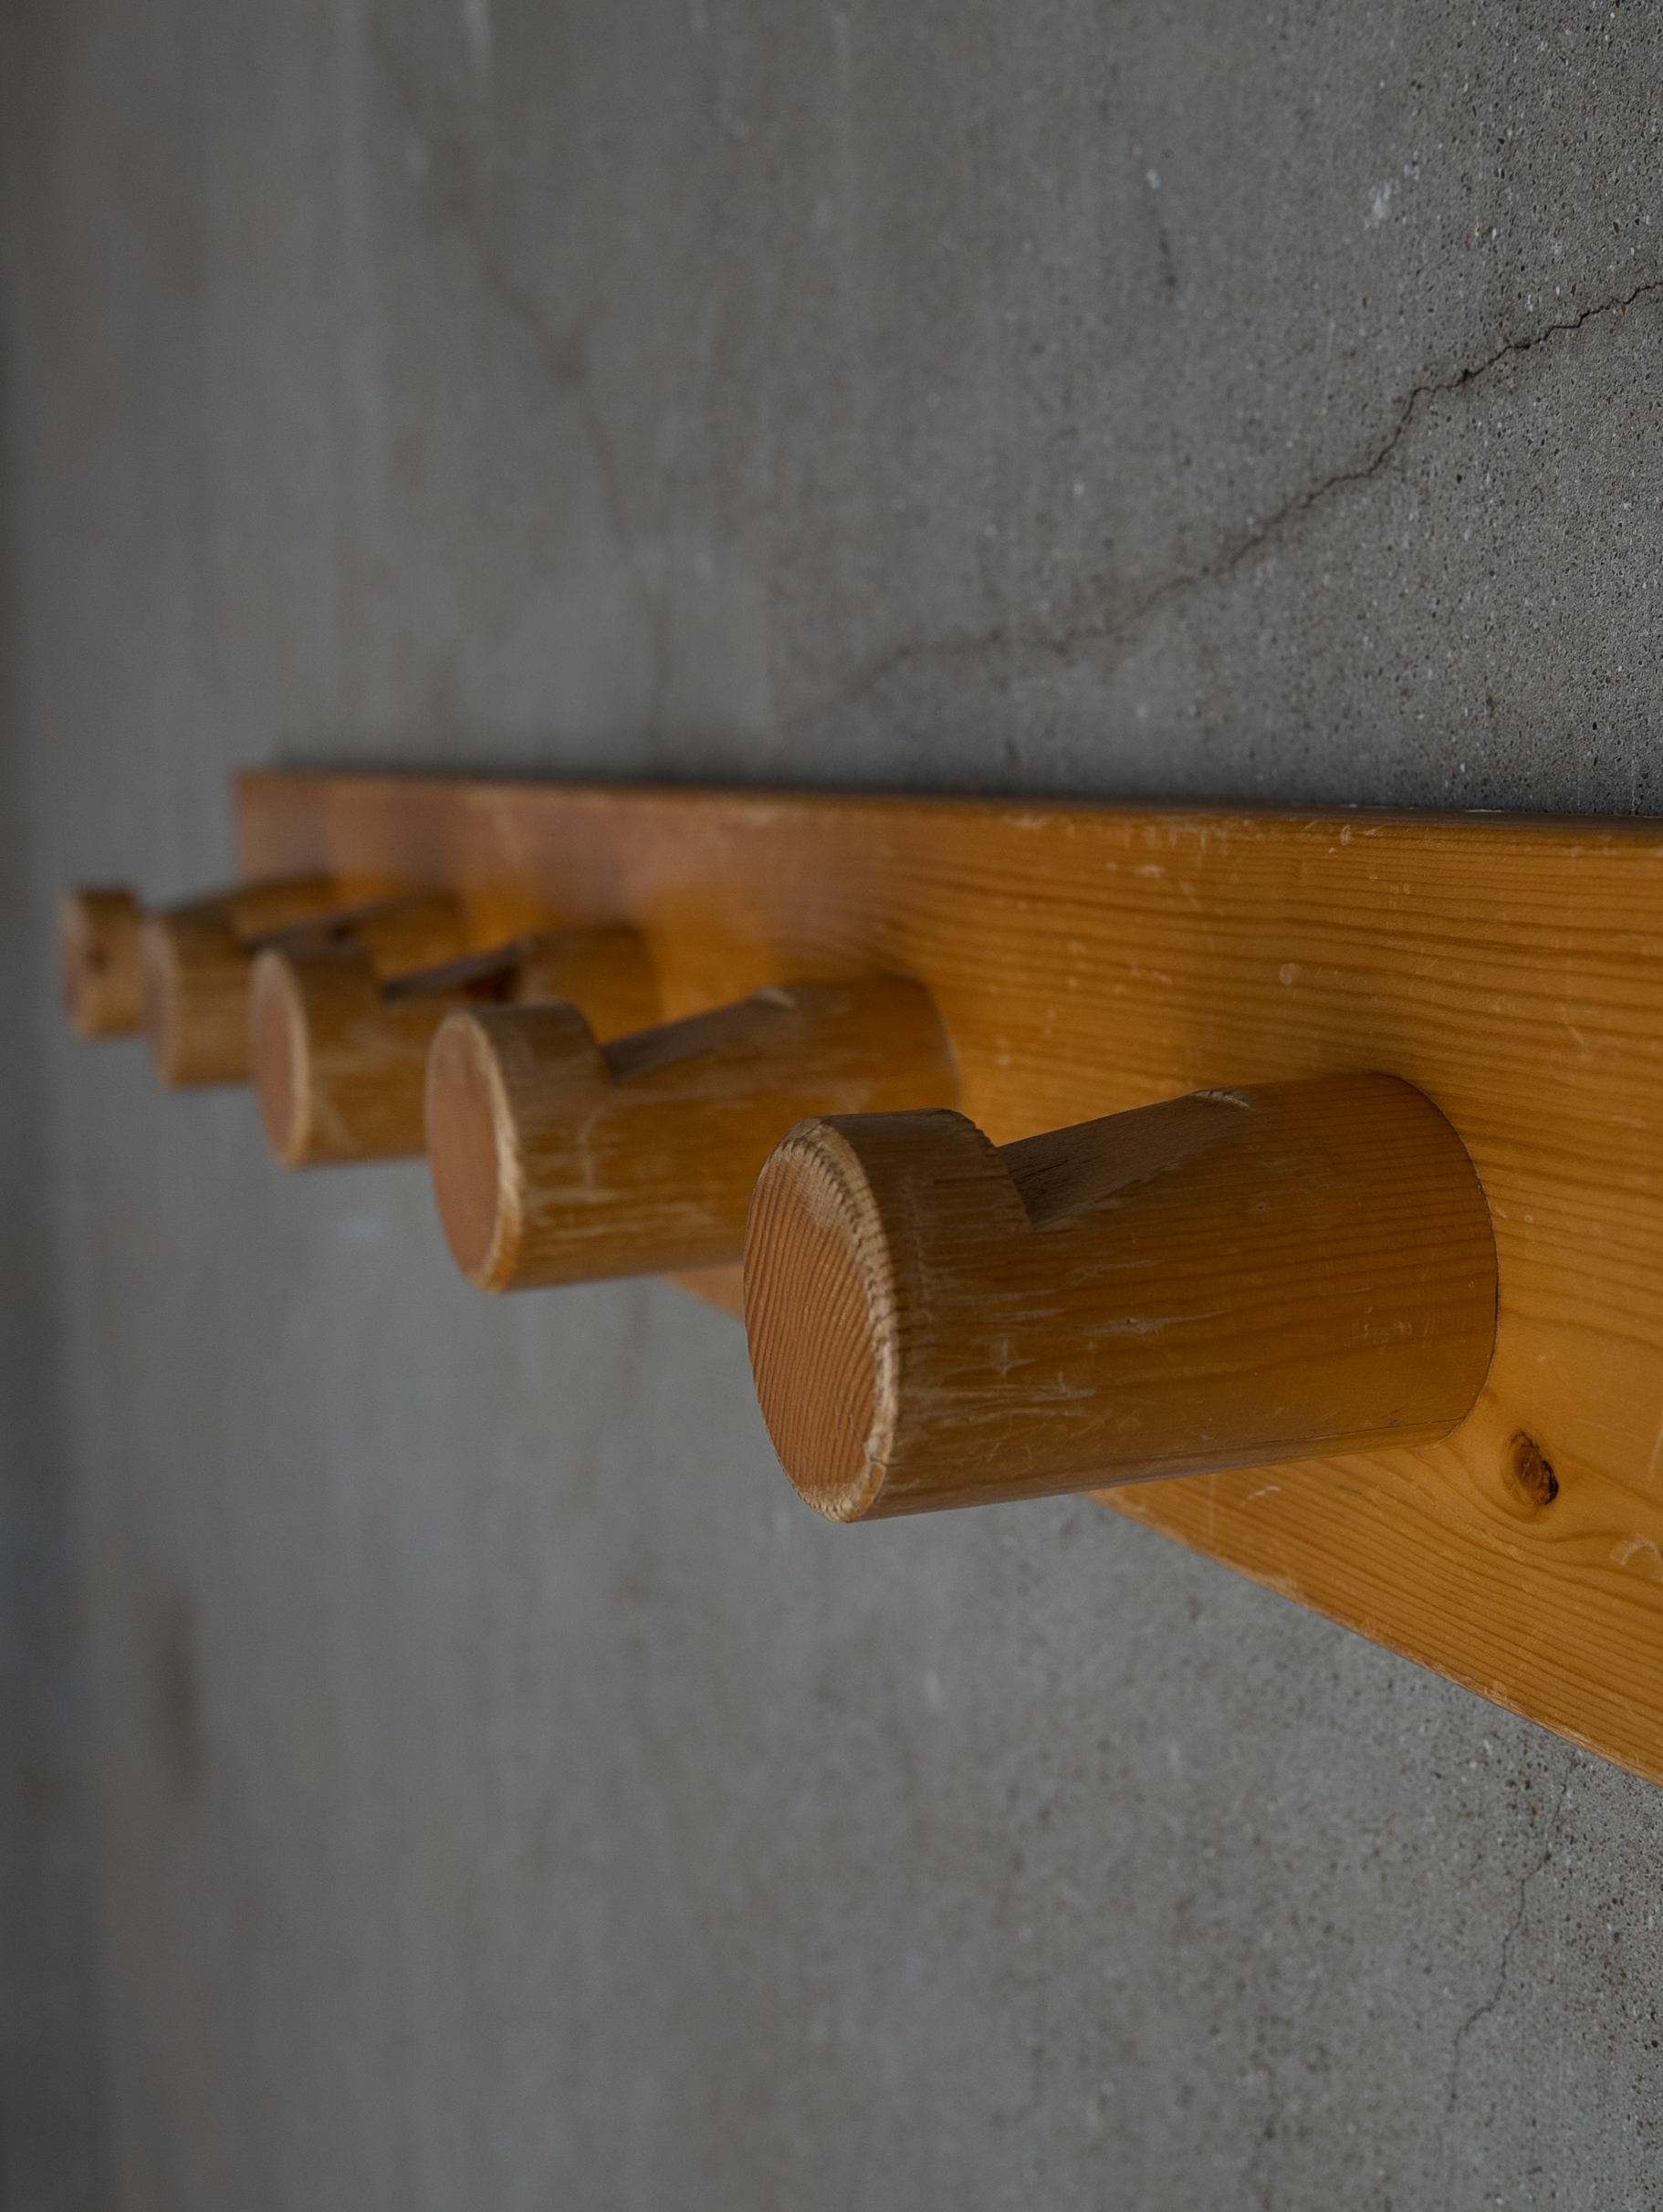 Coat Rack from Les Arcs by Charlotte Perriand